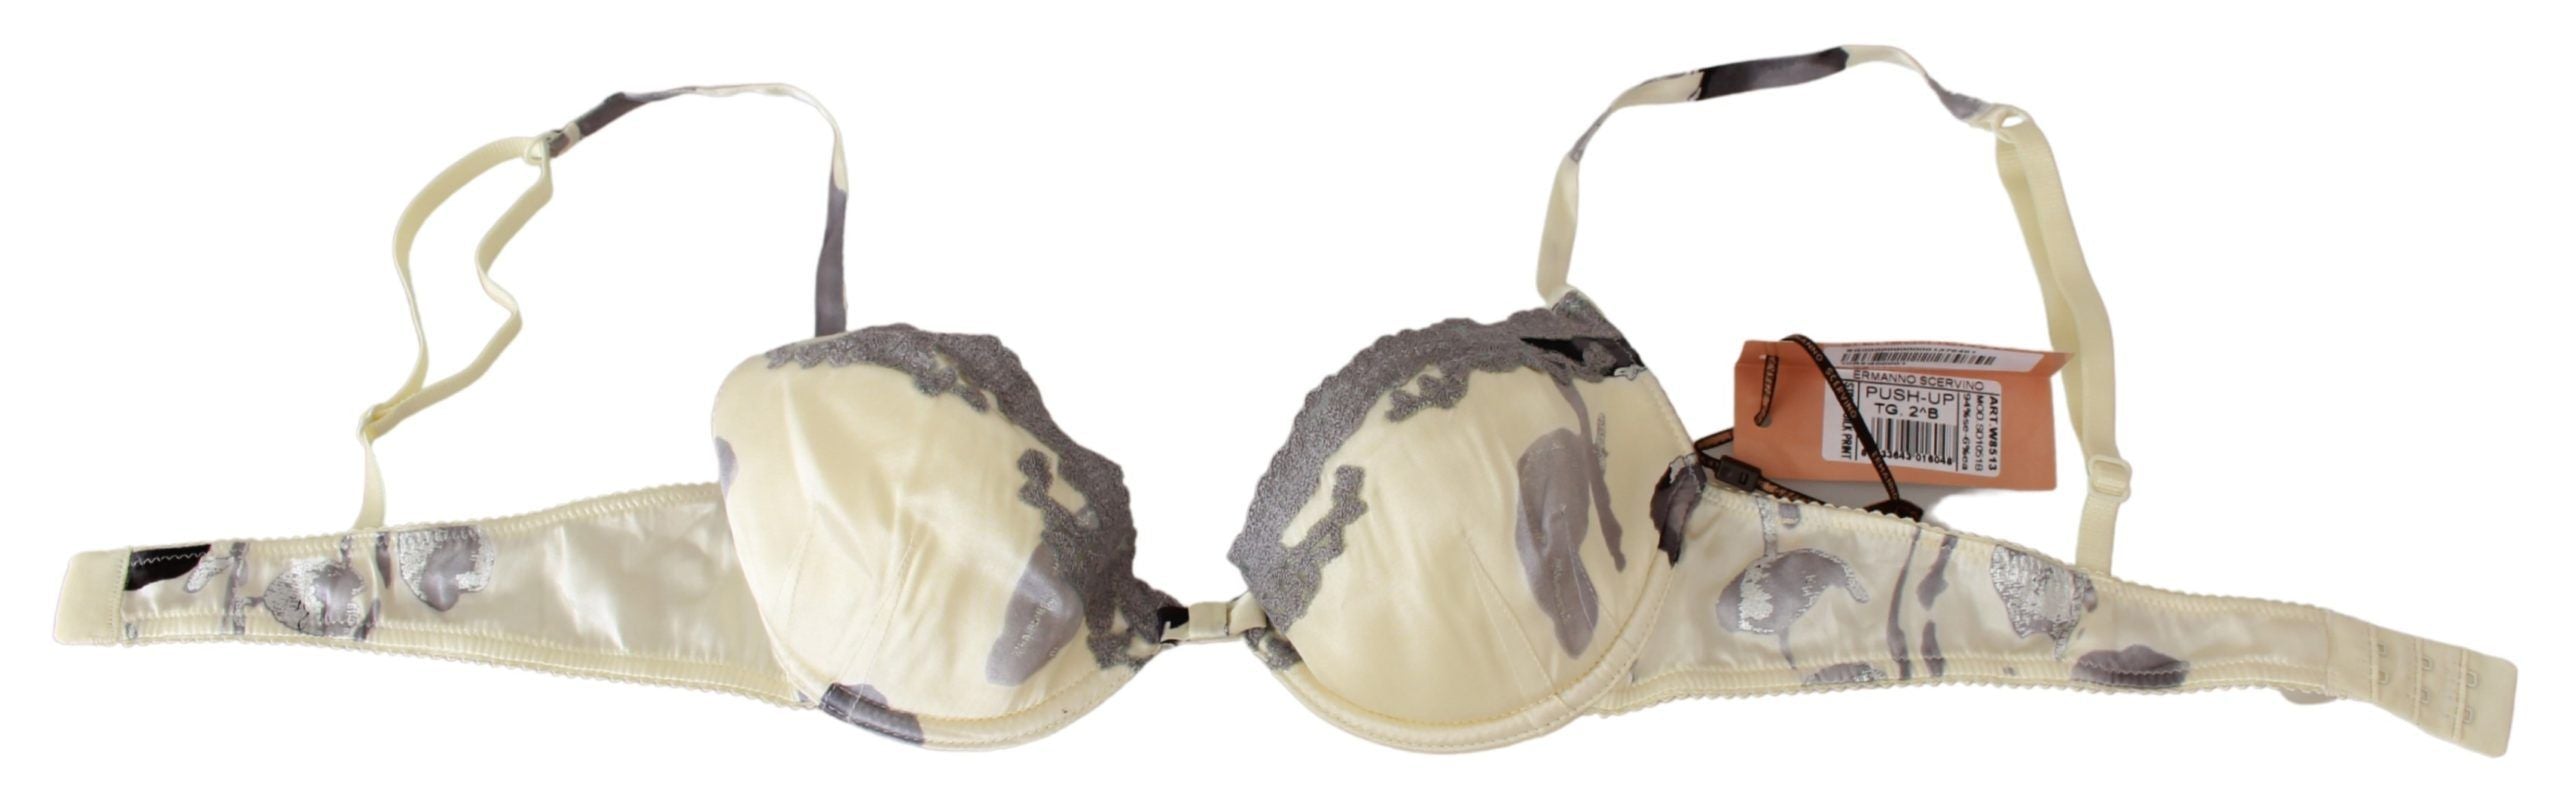 Ermanno Scervino Silk Blend Push-Up Bra in Beige and Gray